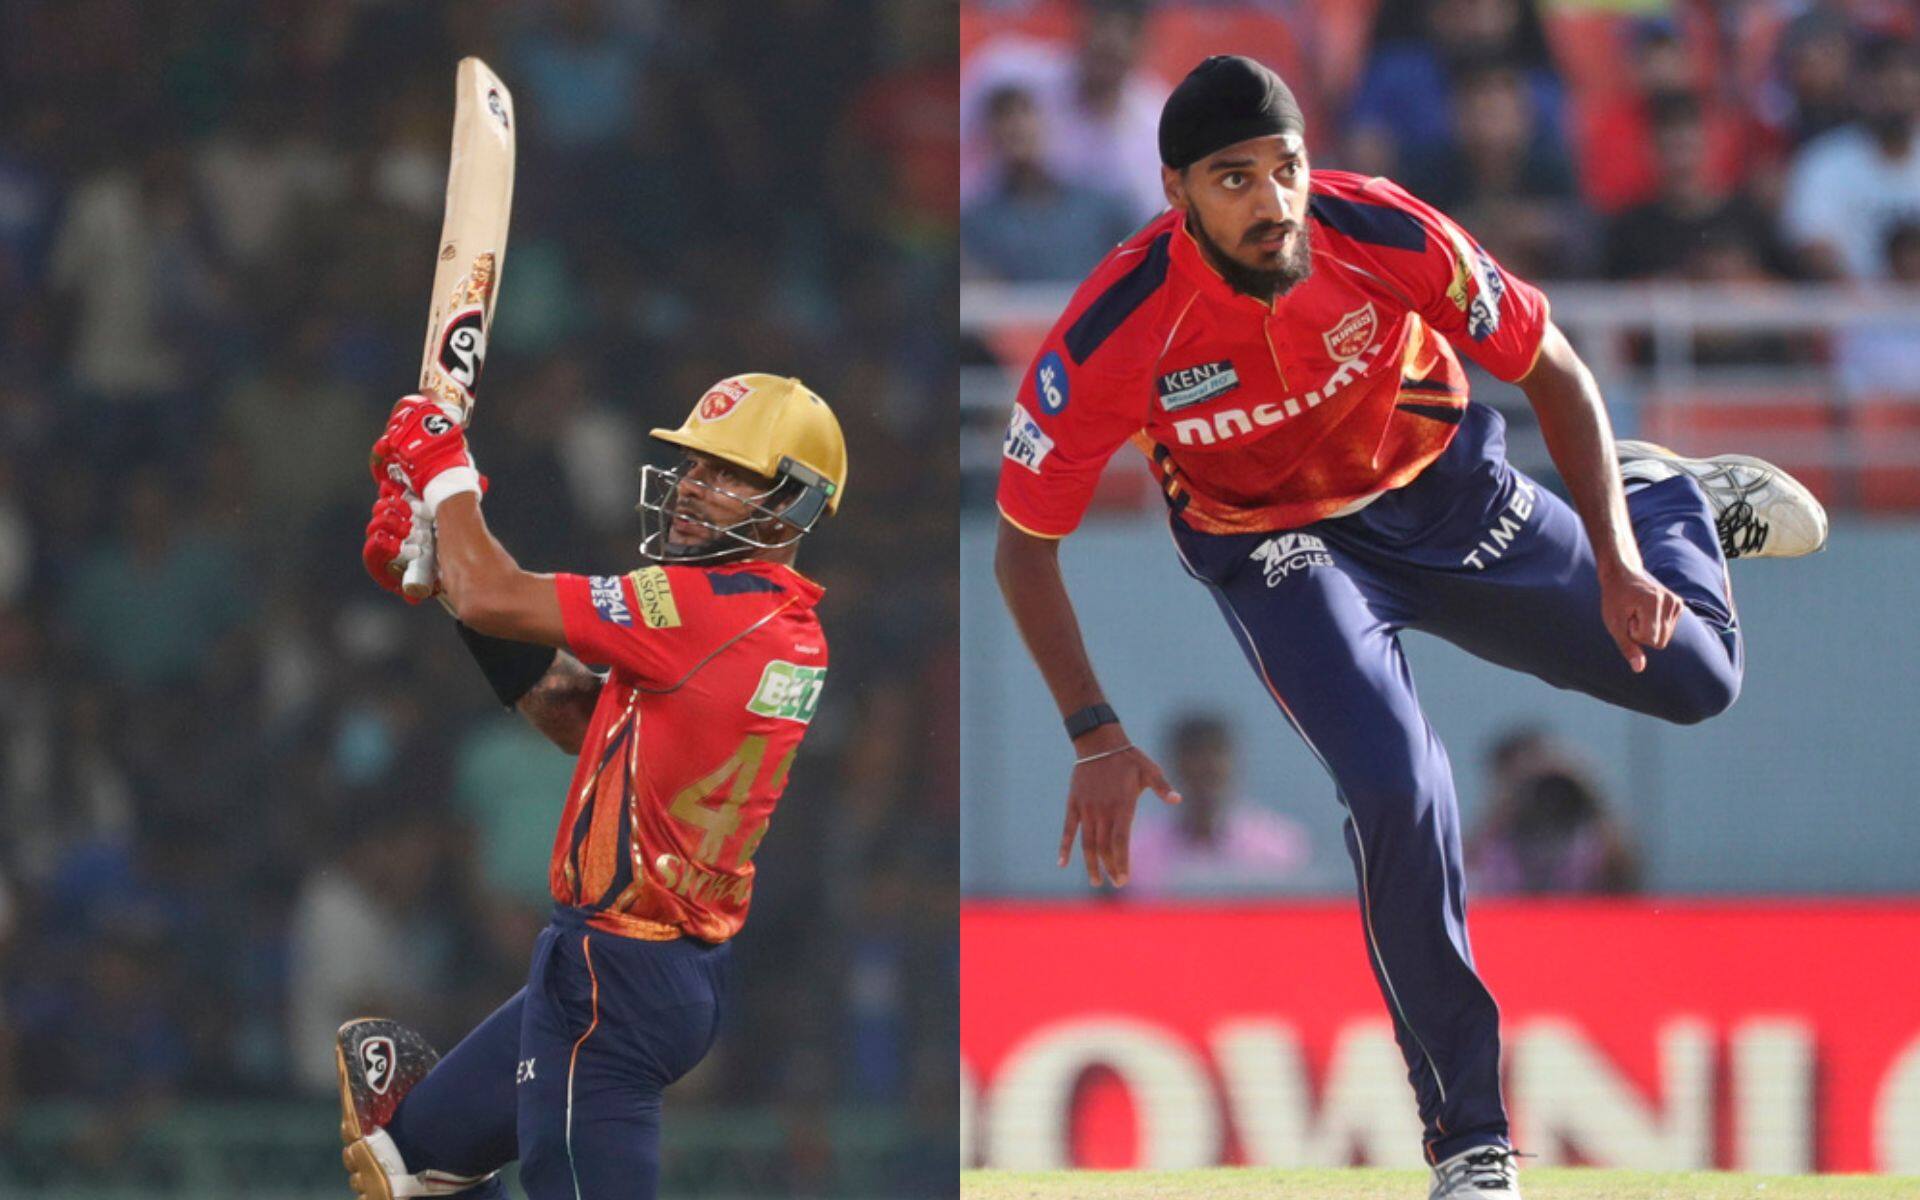 Shikhar Dhawan and Arshdeep Singh would be crucial for PBKS in the game [iplt20.com]